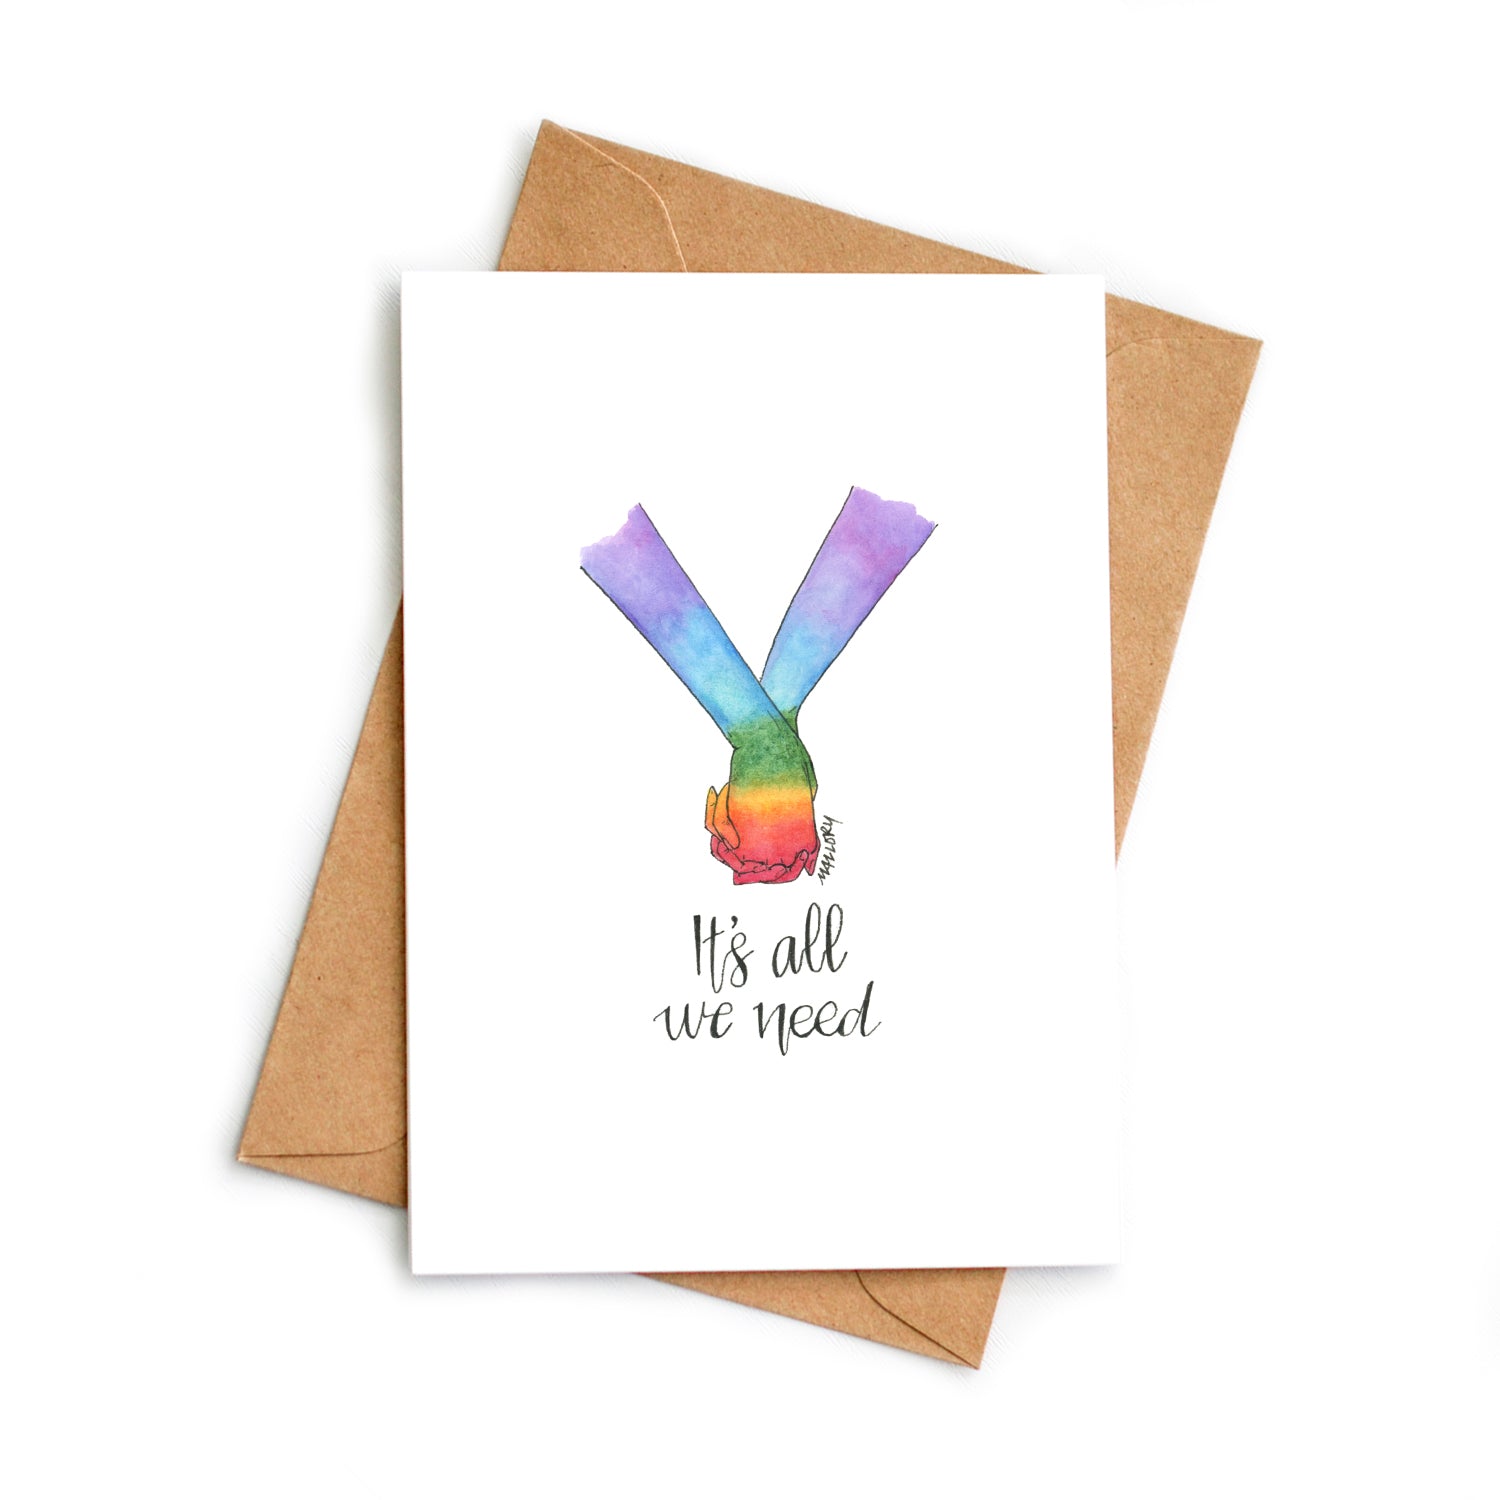 Image of a pride card to show support for LGBTQ+. Hand-drawn card shows two holding hands that are painted with the pride rainbow with the words, "It's all we need" lettered below.